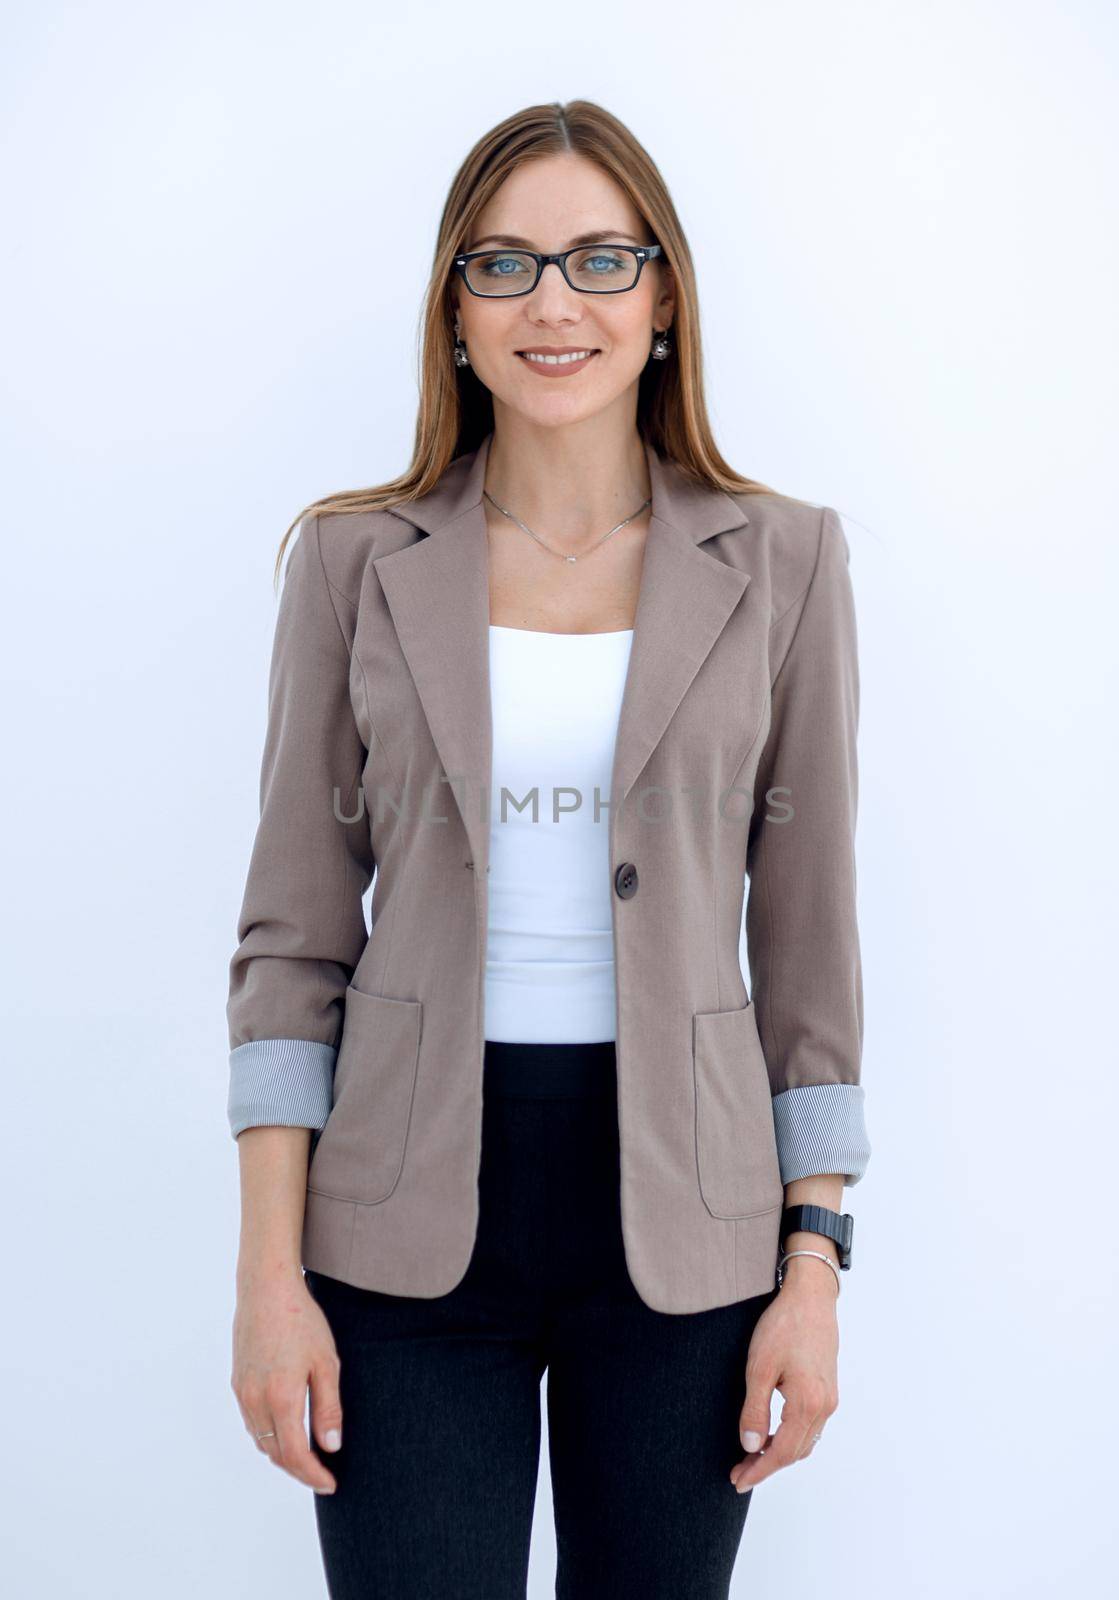 Portrait of a young woman smiling in a business suit